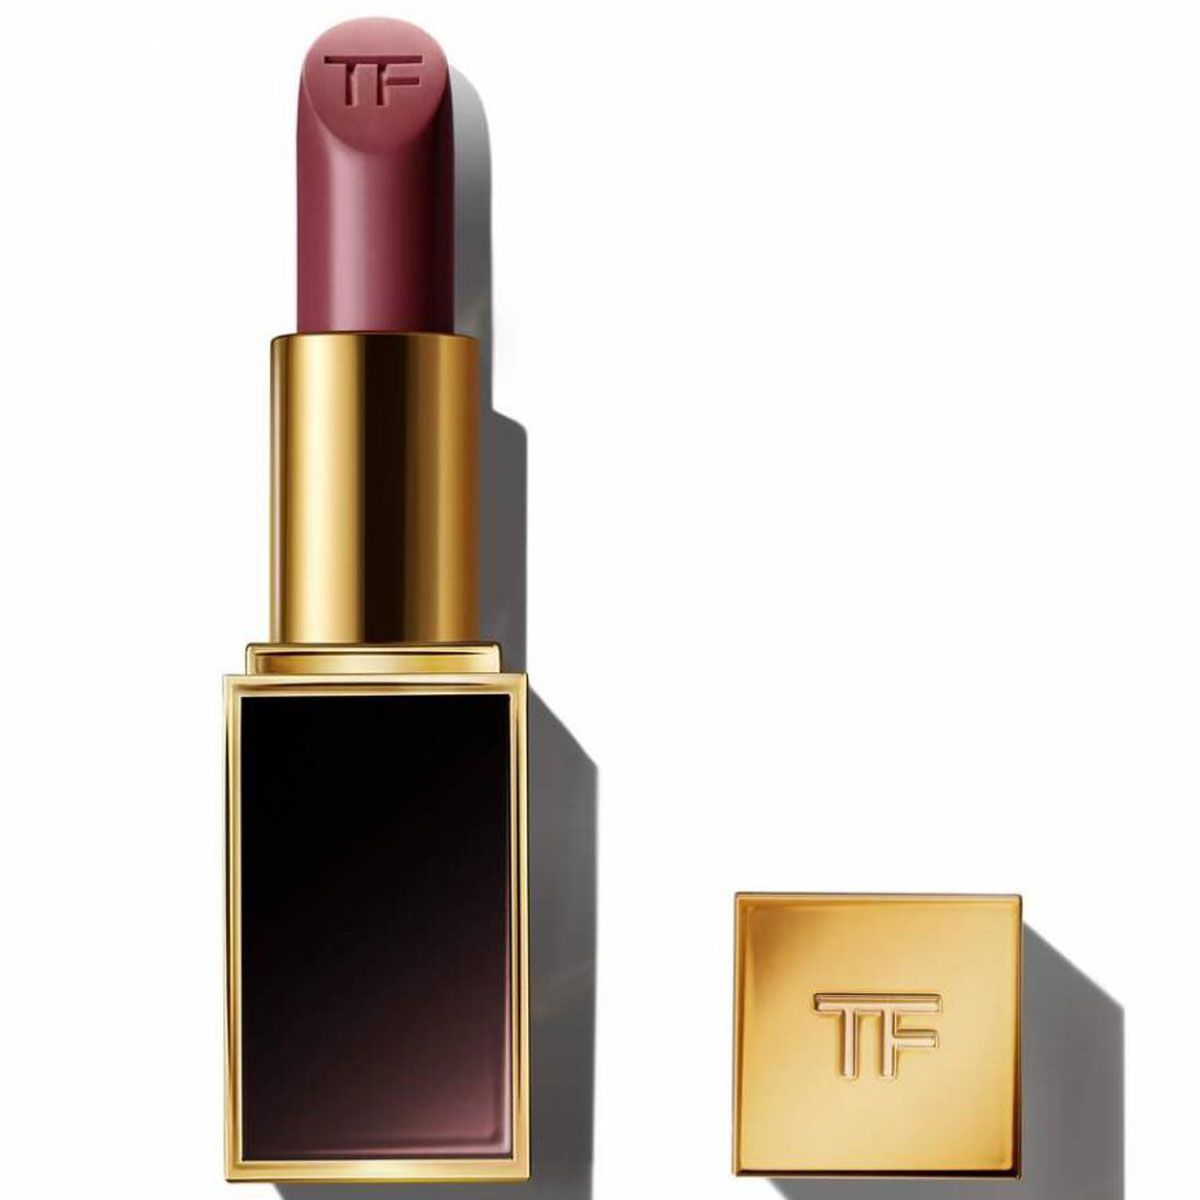  Son Tom Ford Impassioned 80 